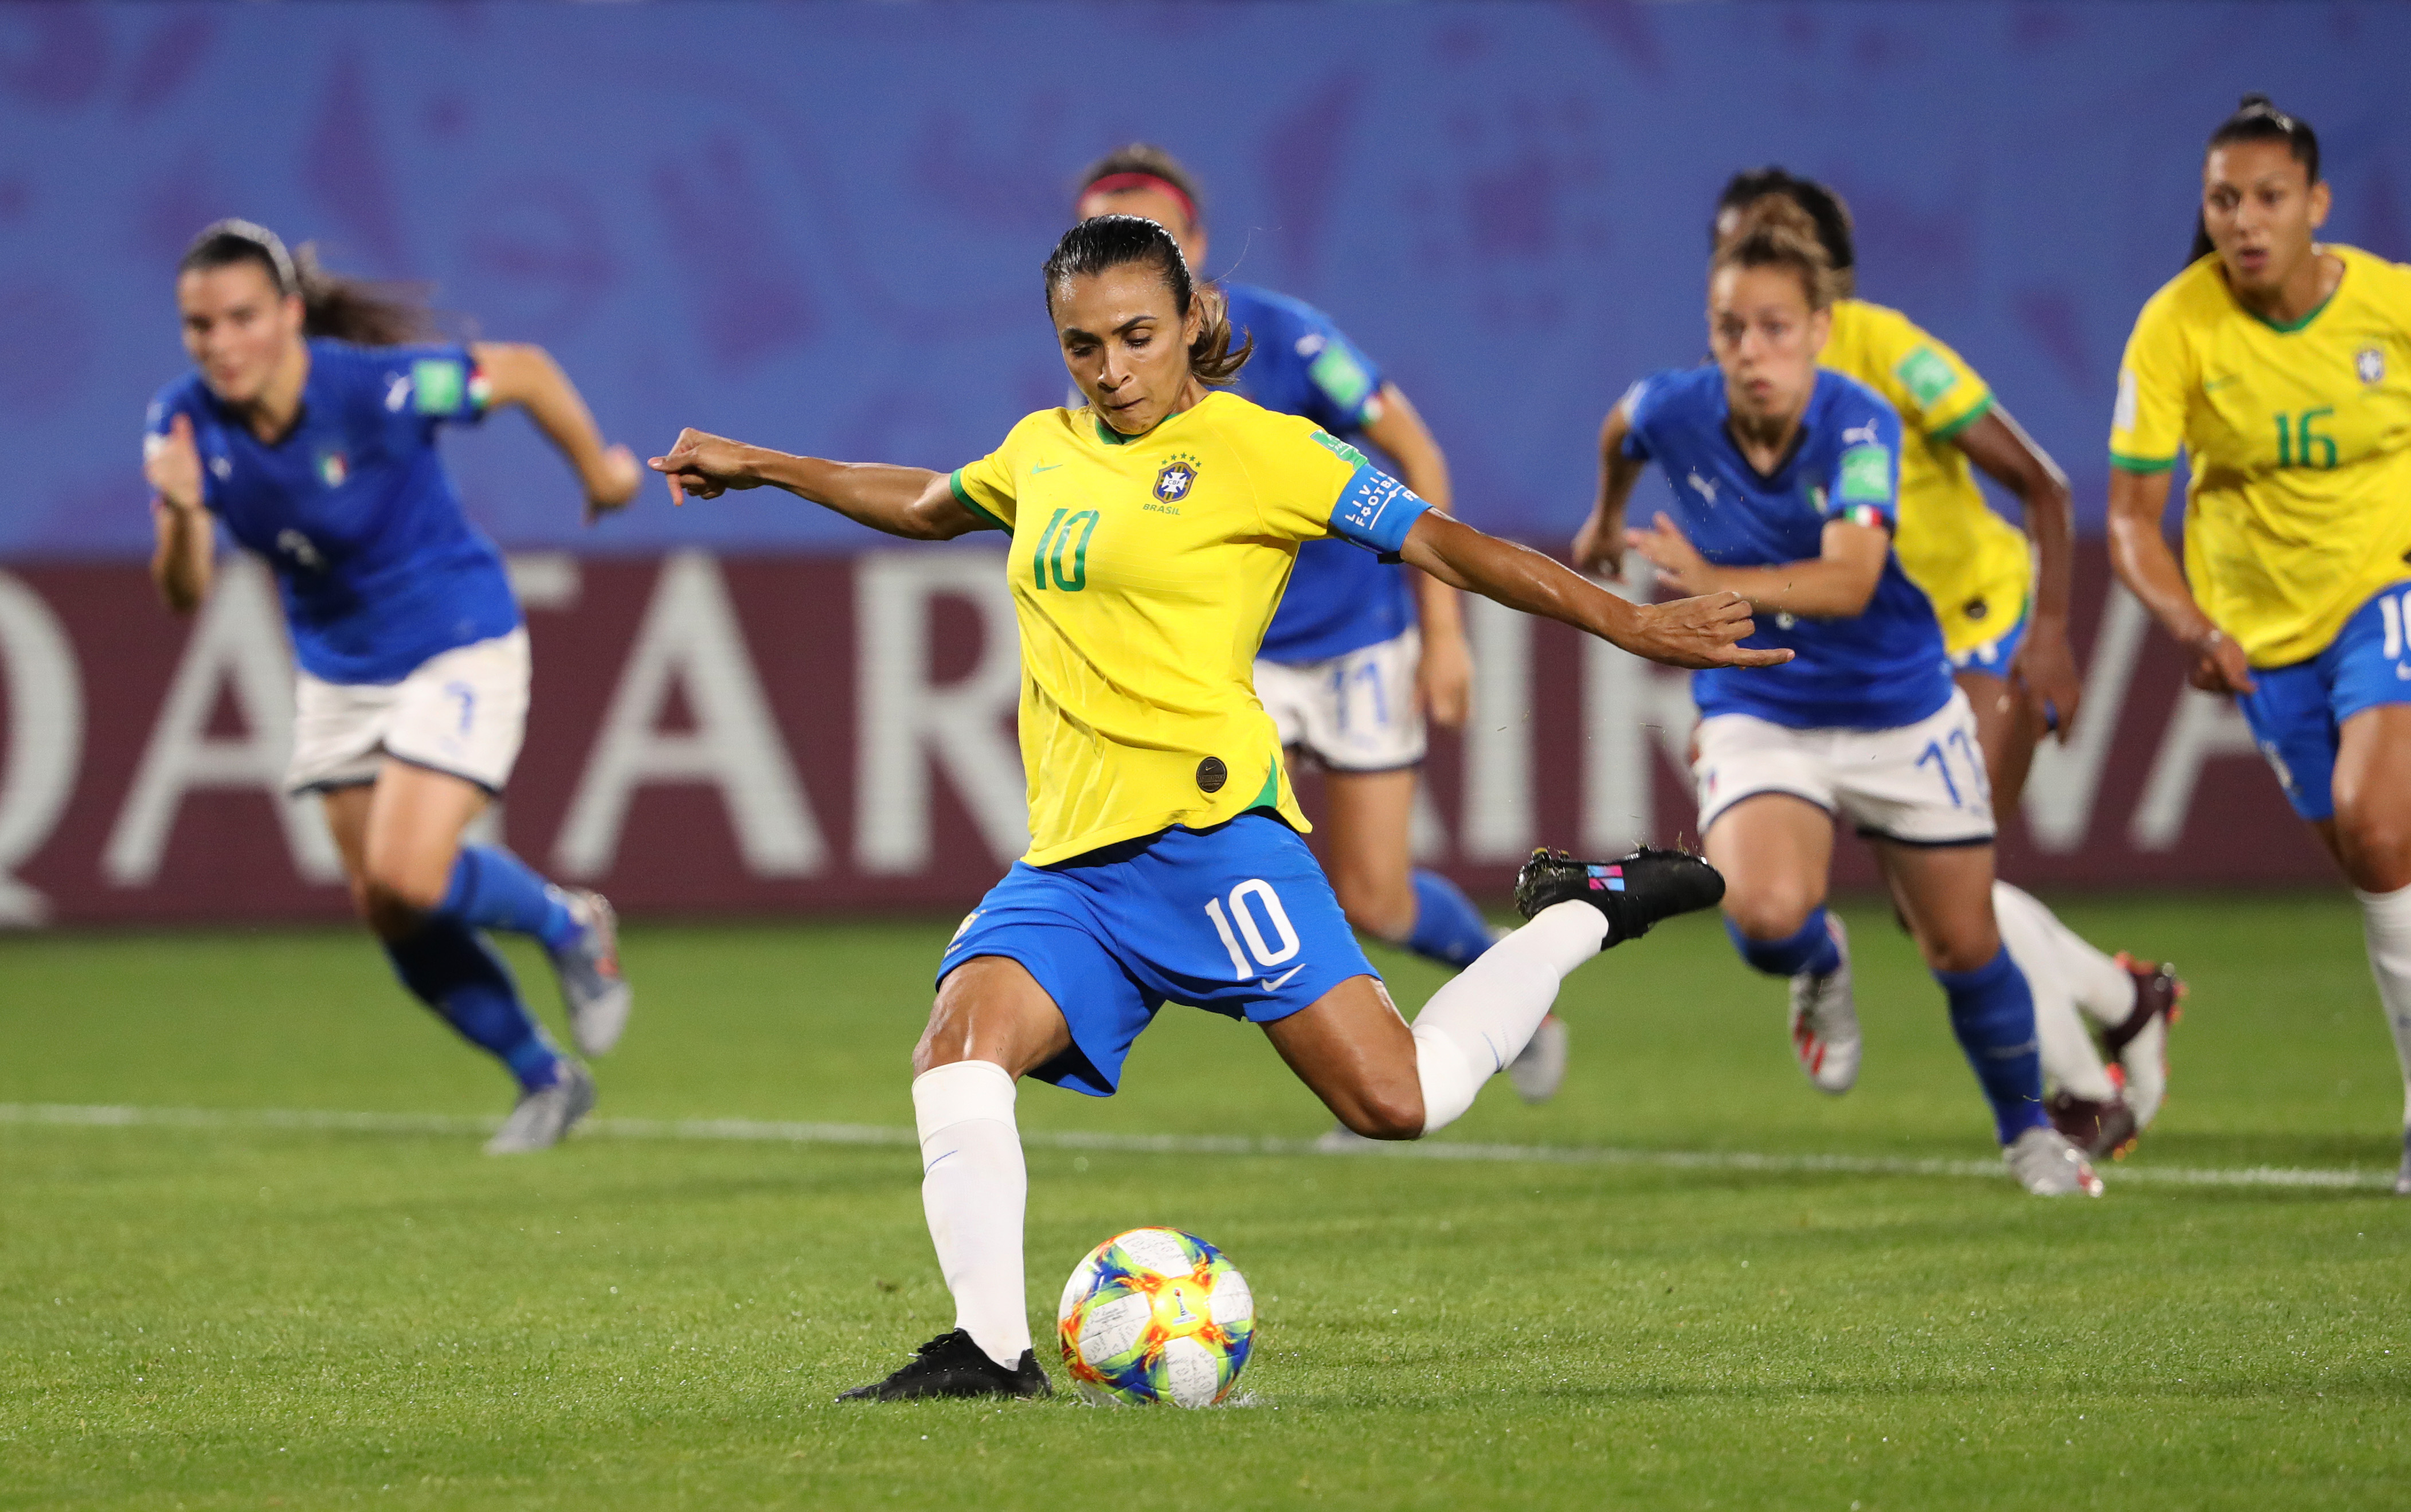 Brazil S Marta Has Set A New Career World Cup Goals Record 17 In 1 0 Win Over Italy R